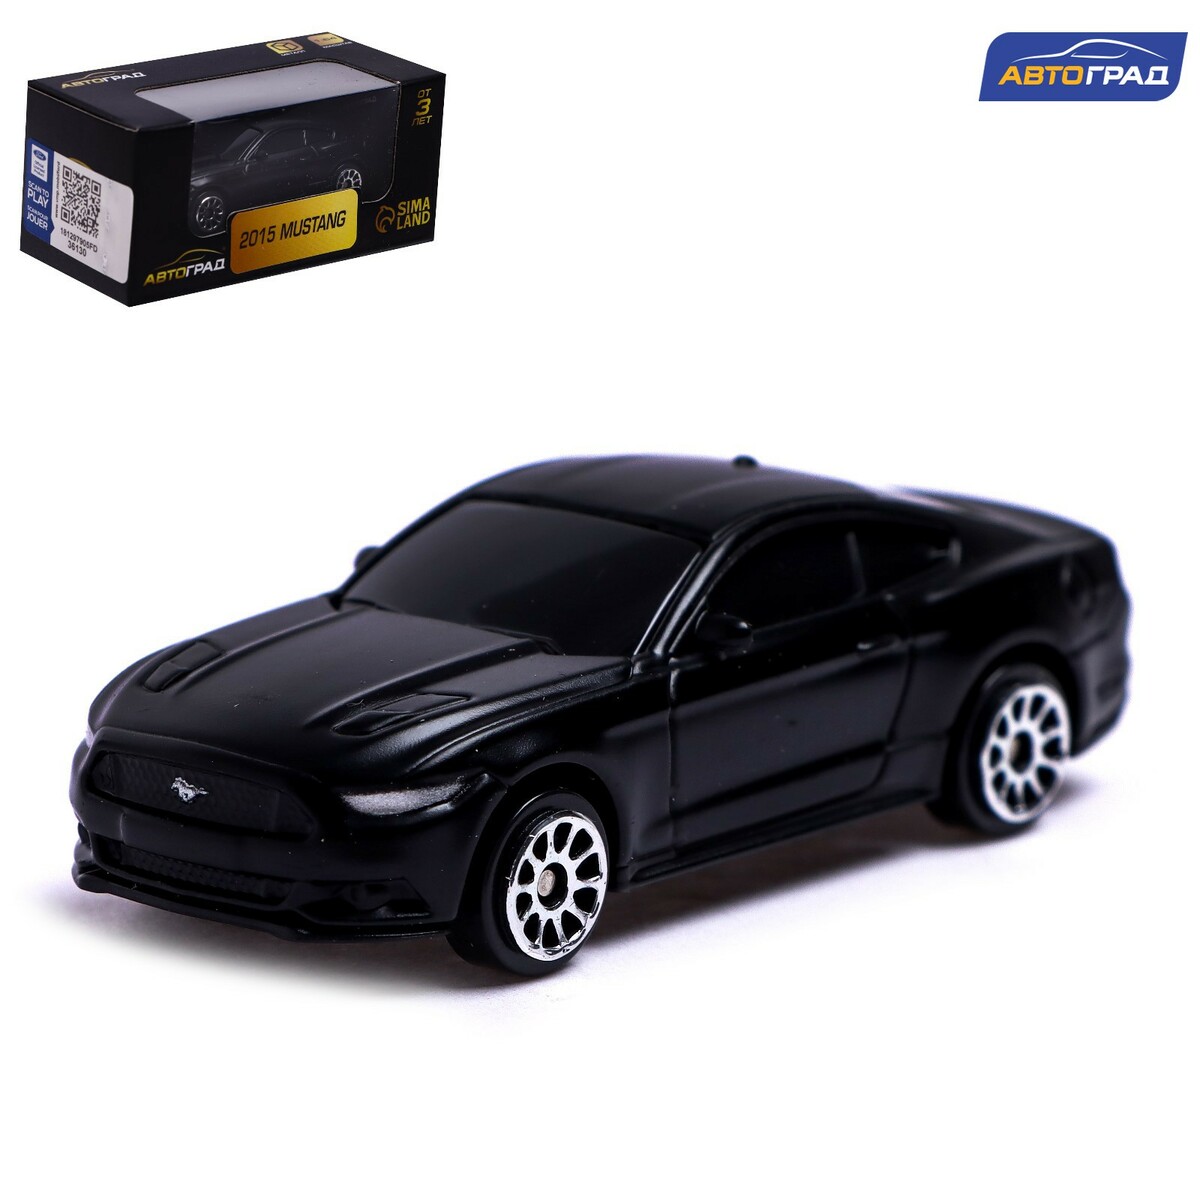 Машина металлическая ford mustang, 1:64, цвет черный матовый he xiang remote control car key shell case for ford ford range edge explorer fusion mustang lincoln mkc mkx mkz replacement card